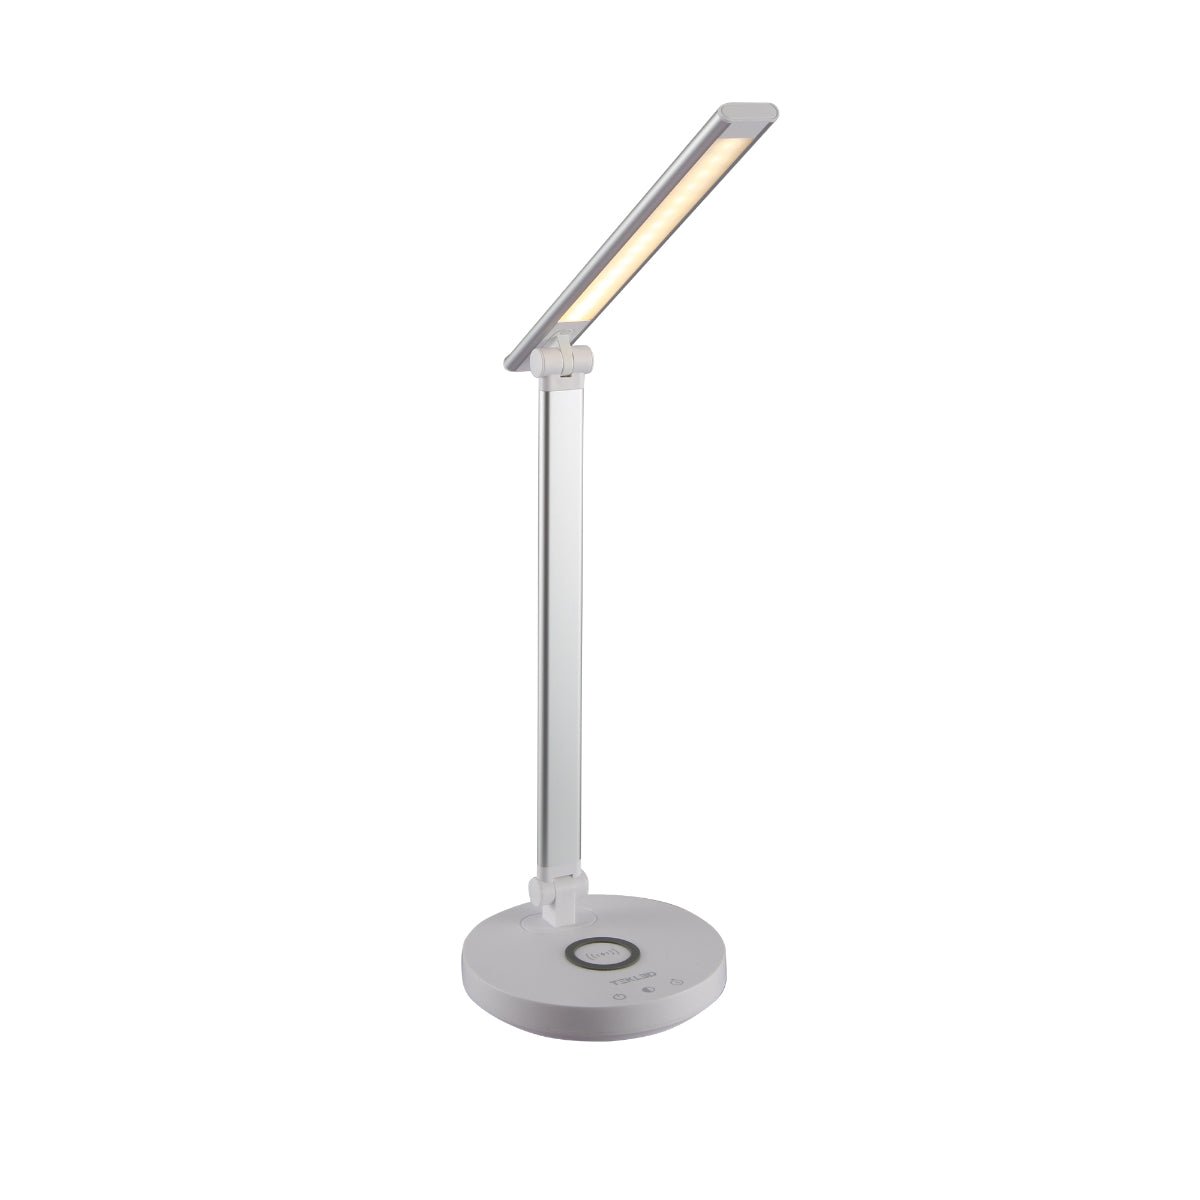 Main image of Lingo Silver Desk Light Dimmable and Colour Modes with Wireless Phone Charger | TEKLED 130-03624